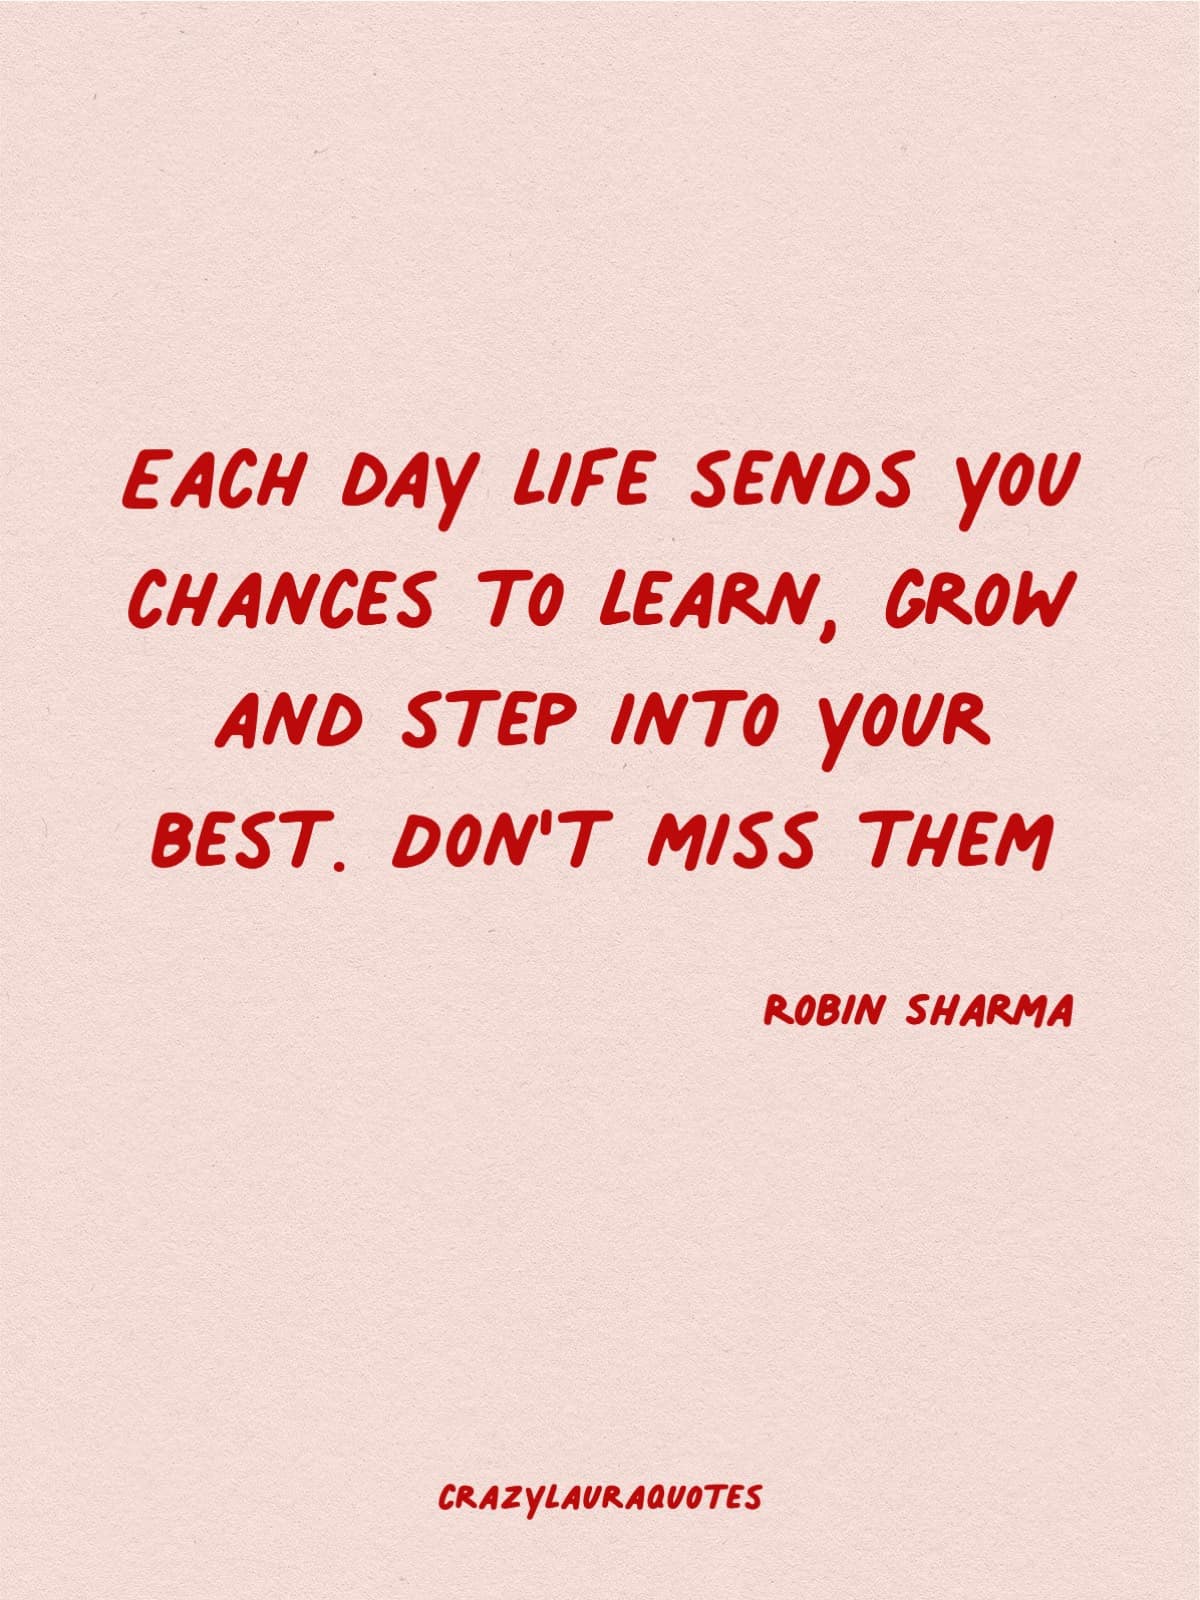 learn and grow each day quote